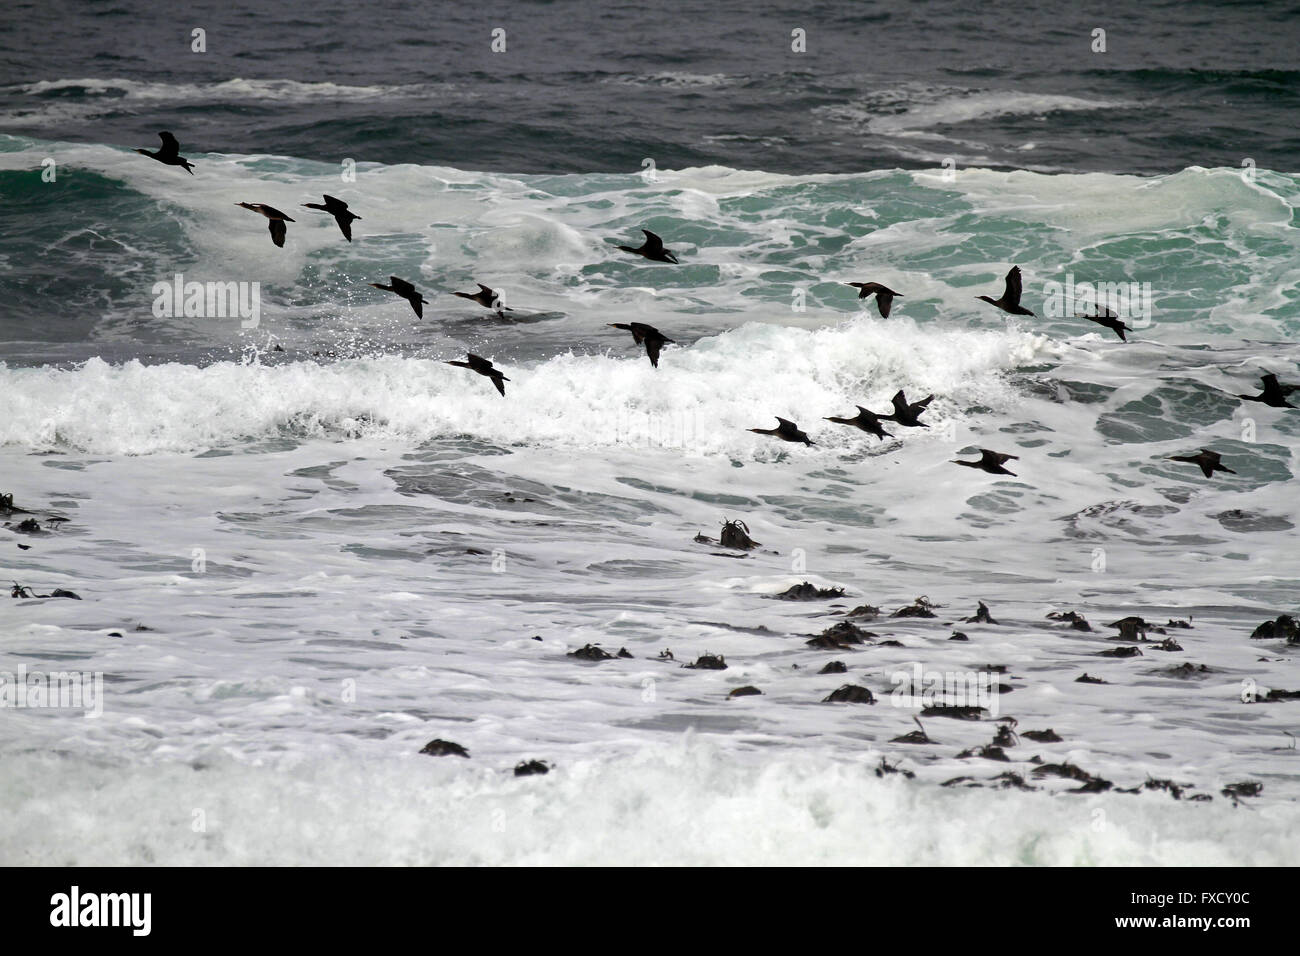 A swarm of  bank cormorants (Phalacrocorax neglectus), also known as Wahlberg's cormorants in flight, Kommetjie, South Africa. Stock Photo